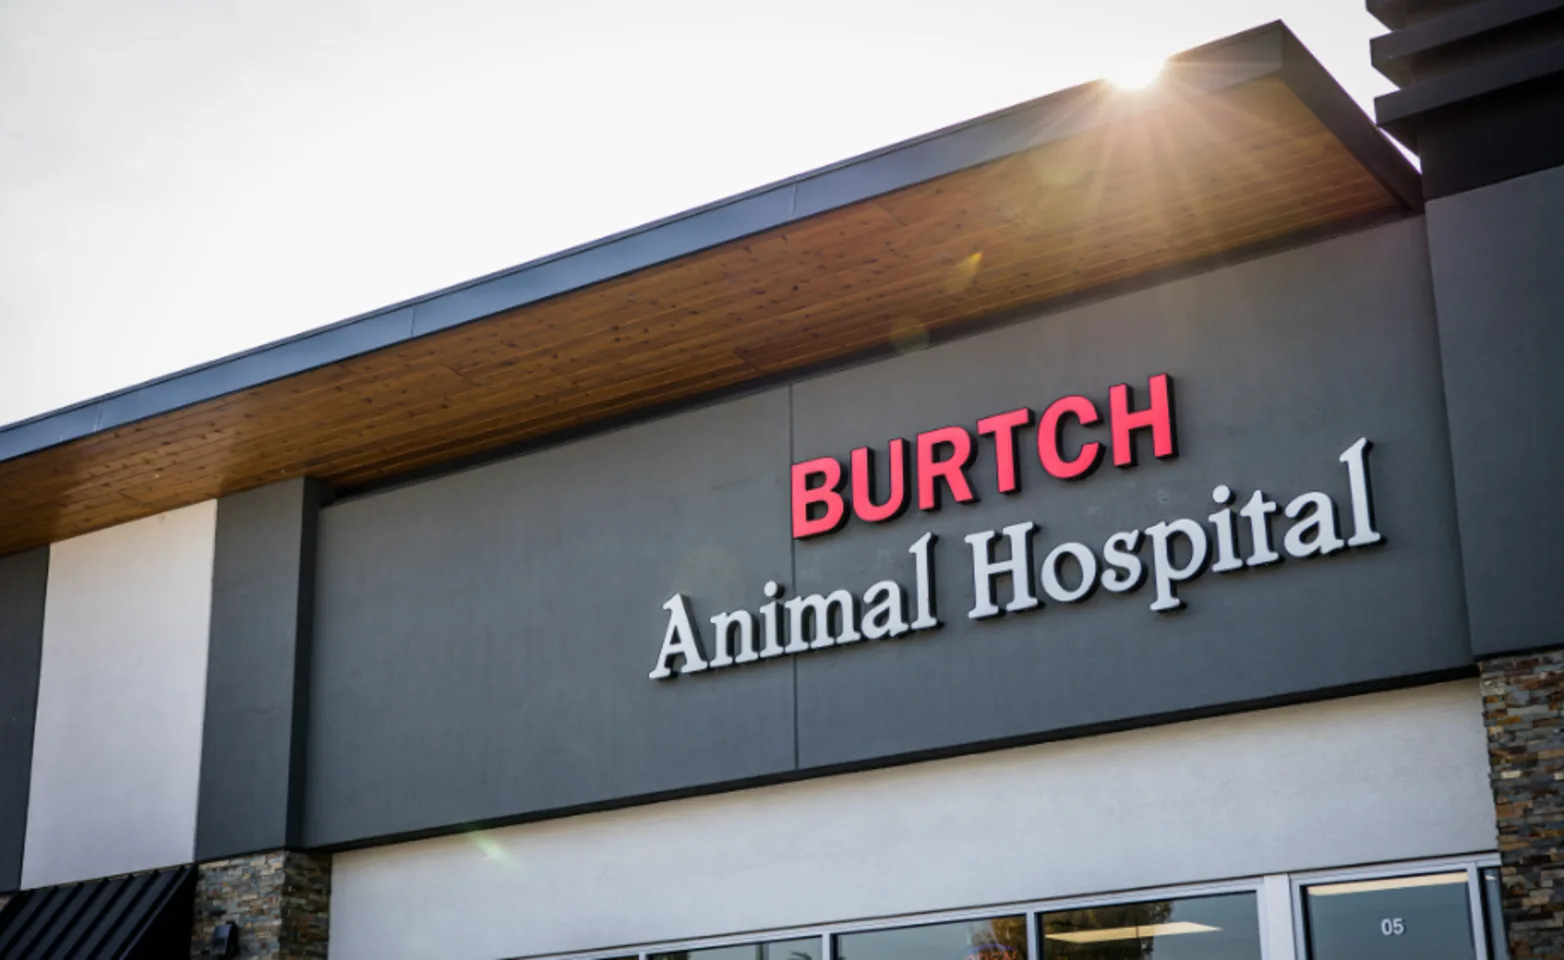 The outside exterior sign of Burtch Animal Hospital